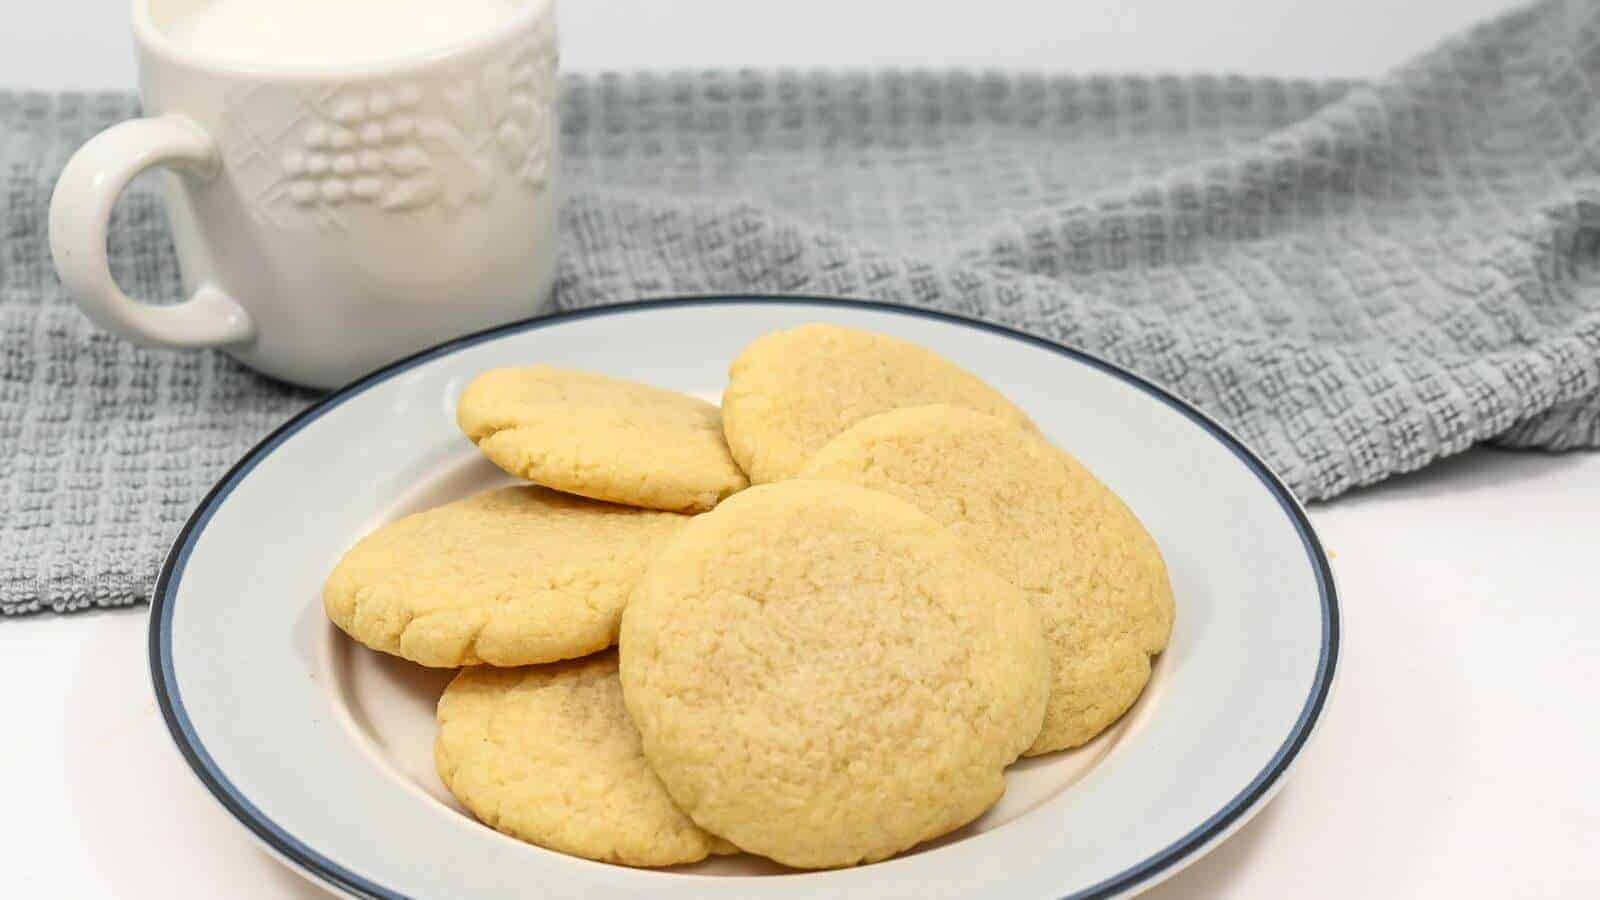 A plate of sugar cookies with a mug of milk and a gray cloth in the background.